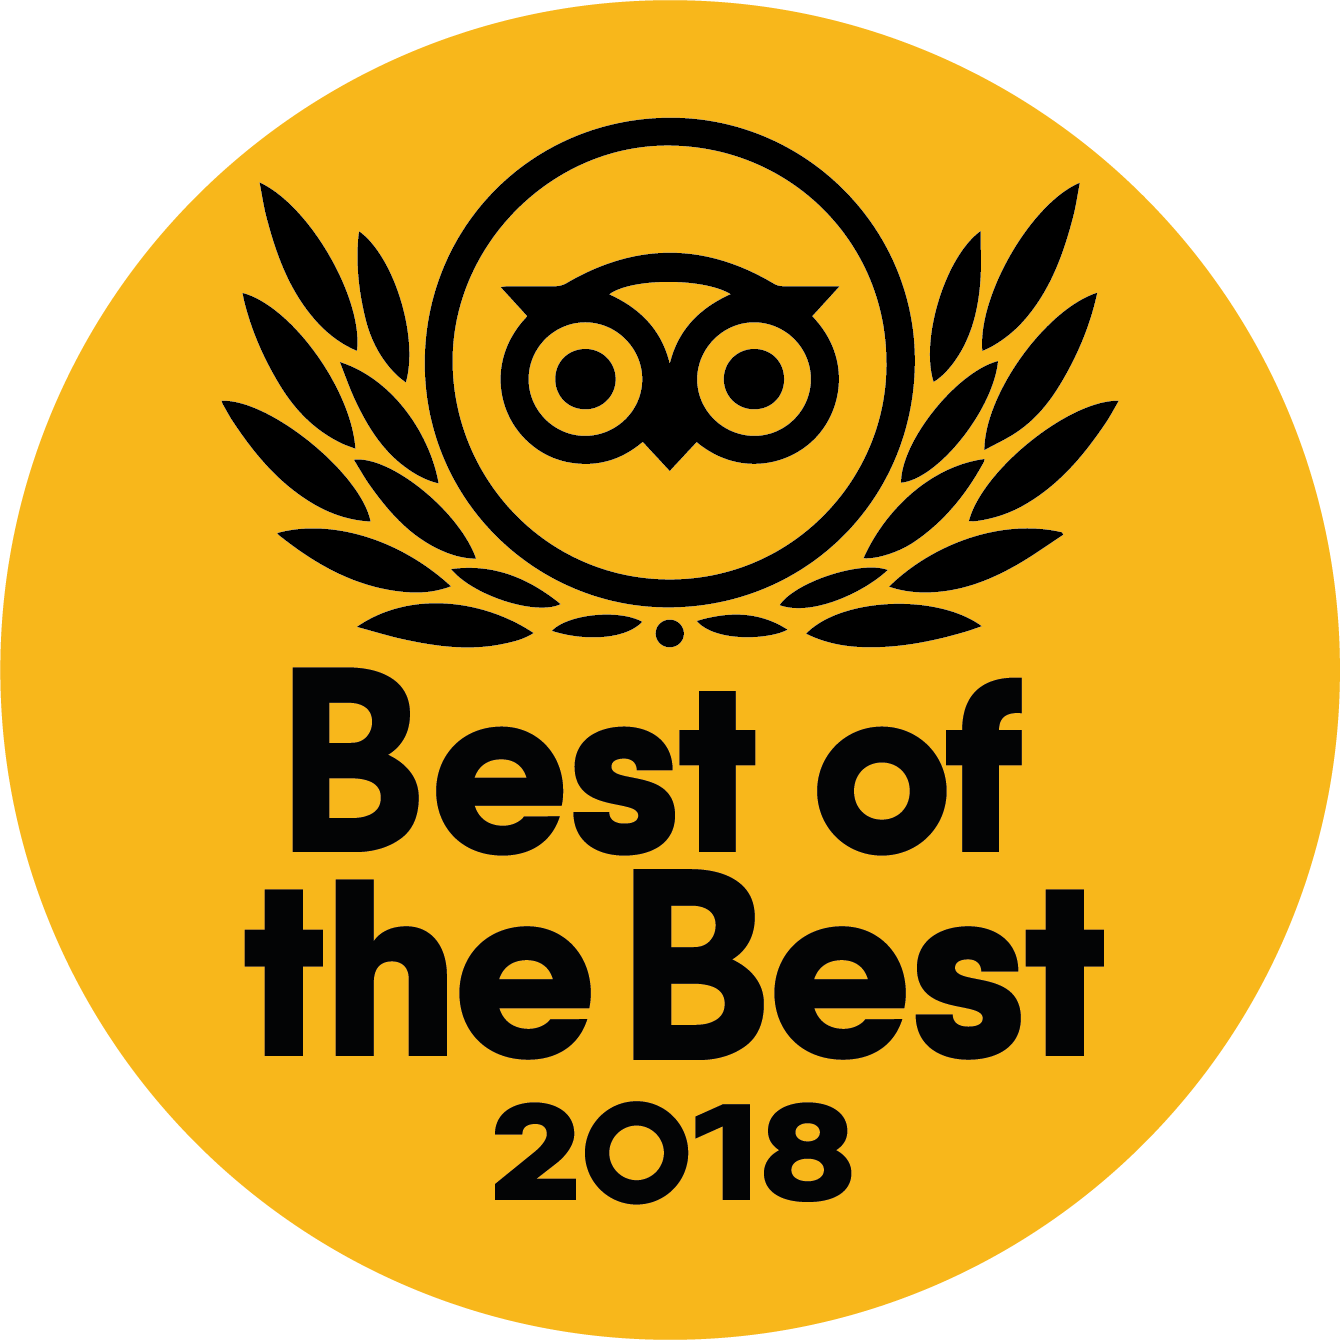 Travellers’ Choice “Best of the Best” 2018